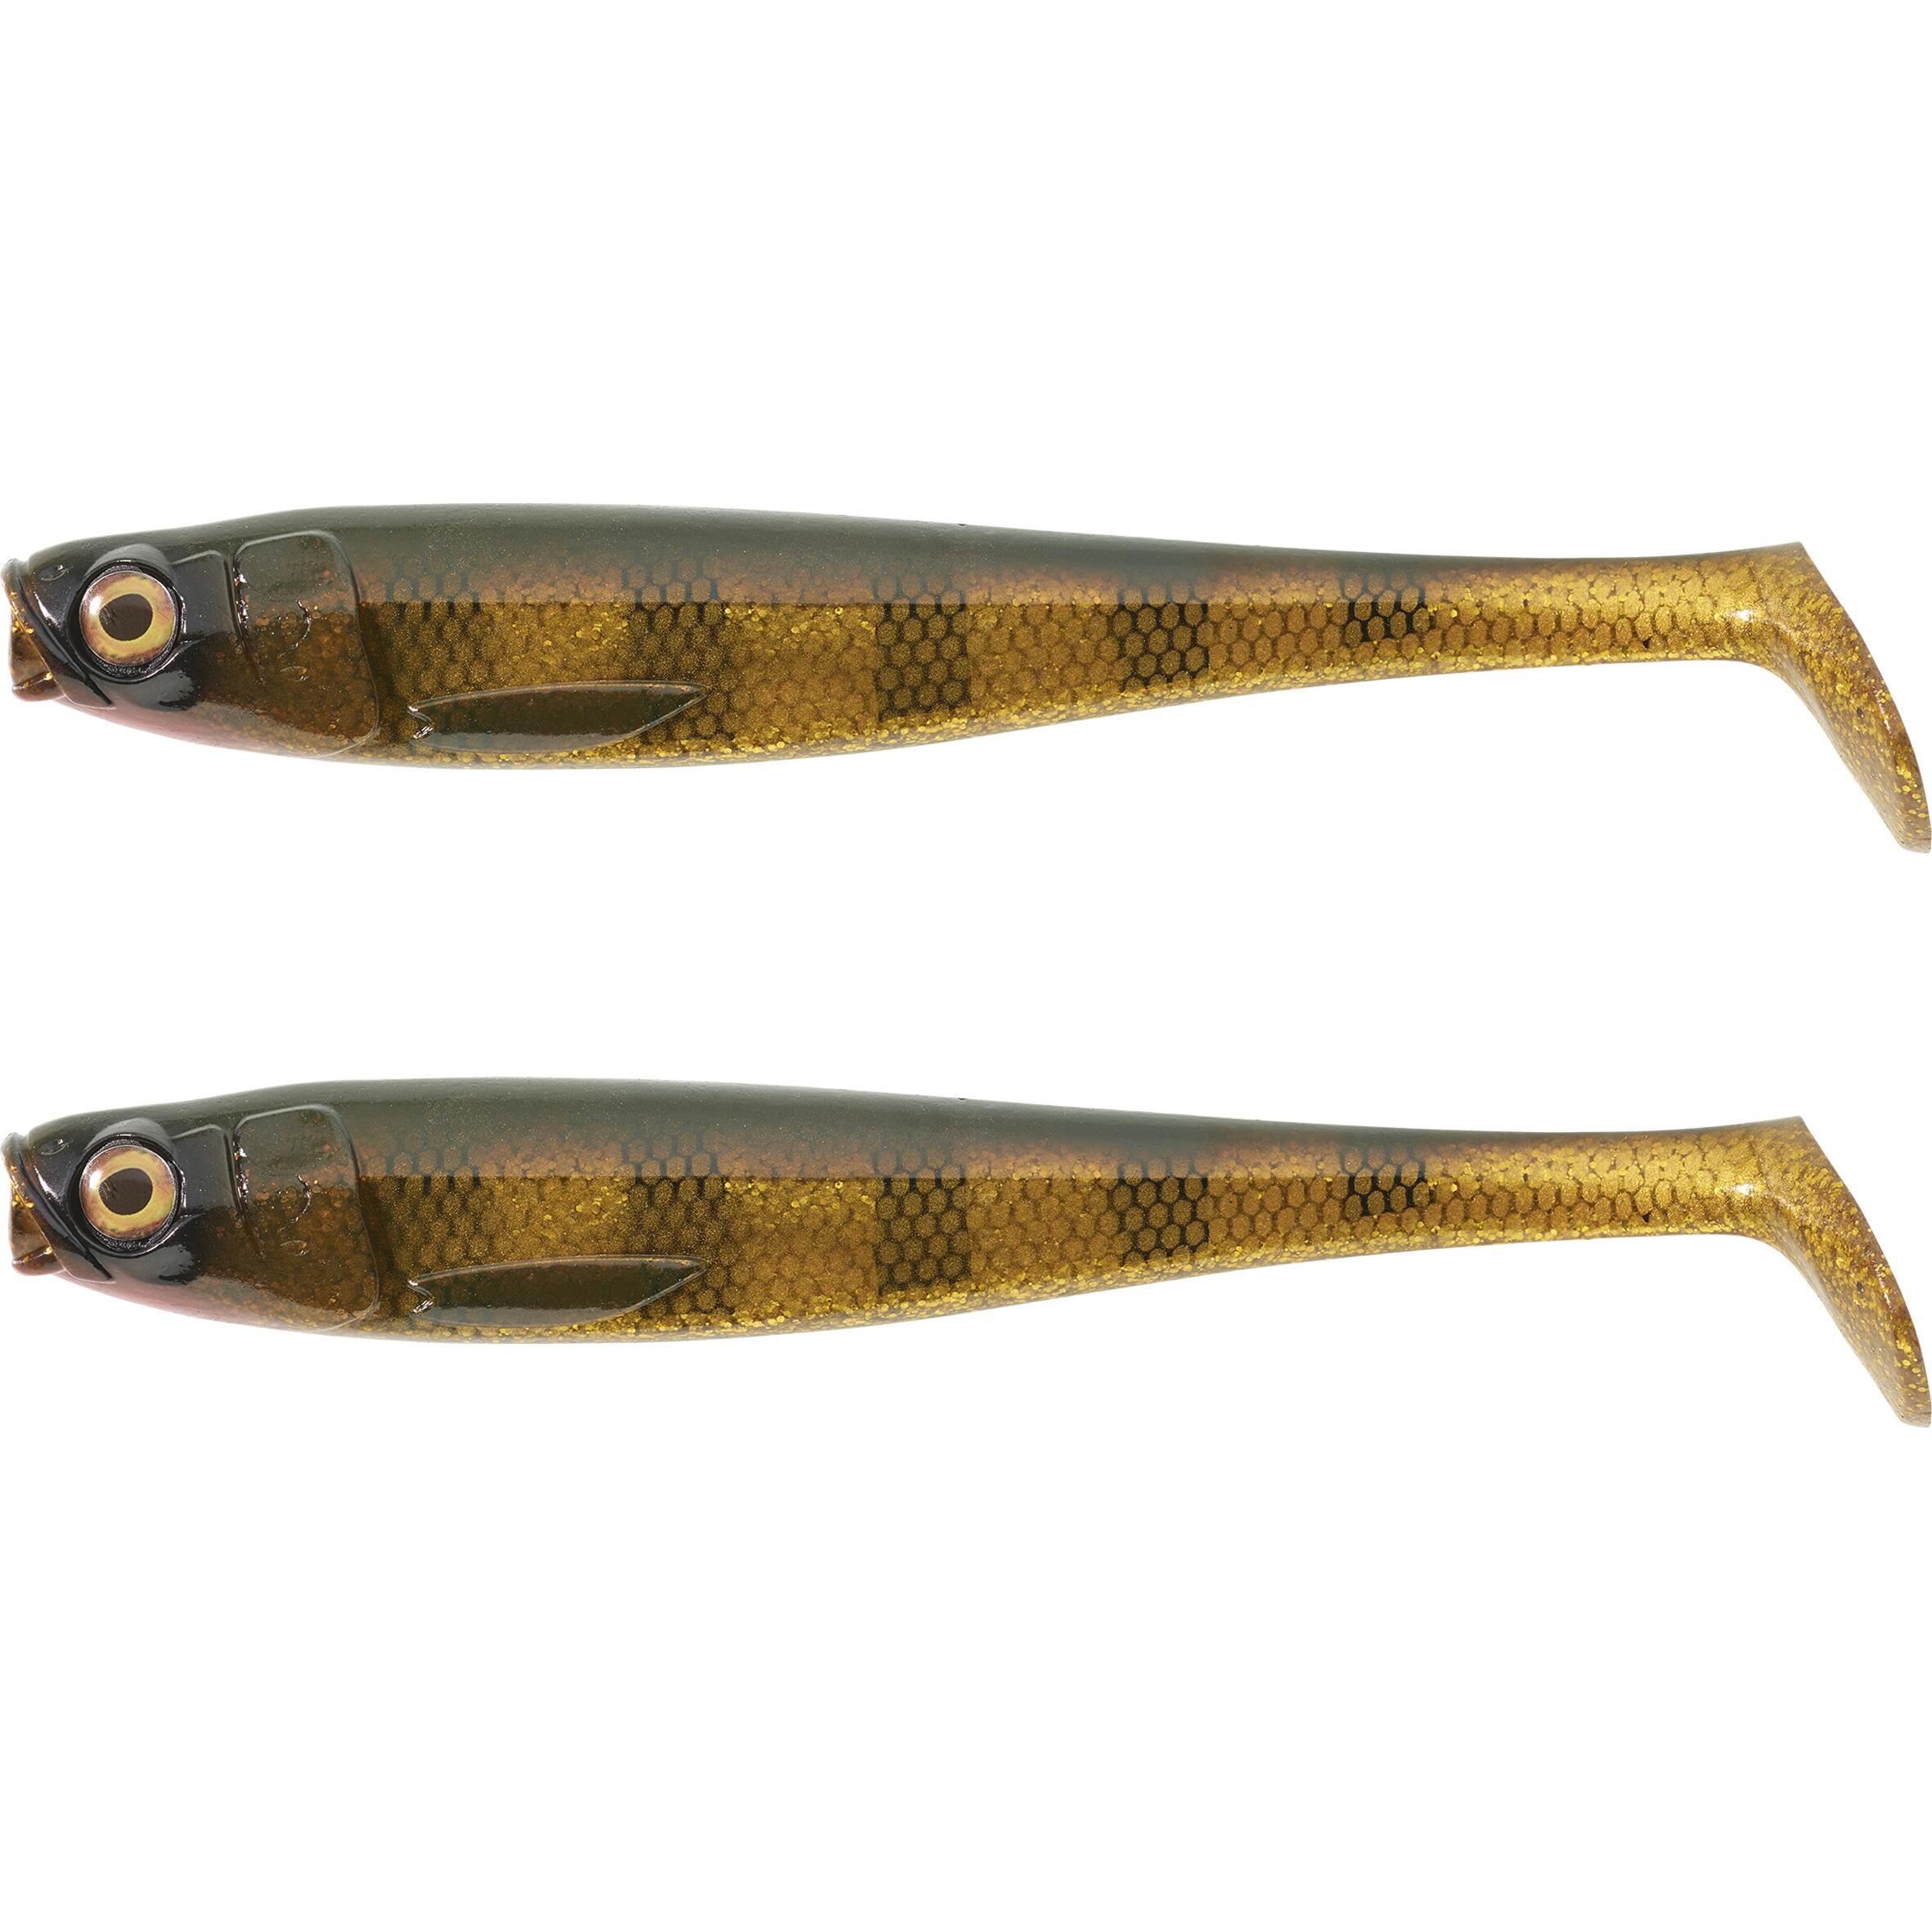 ROGEN SOFT SHAD PIKE LURE 160 GOLD X2 1/4